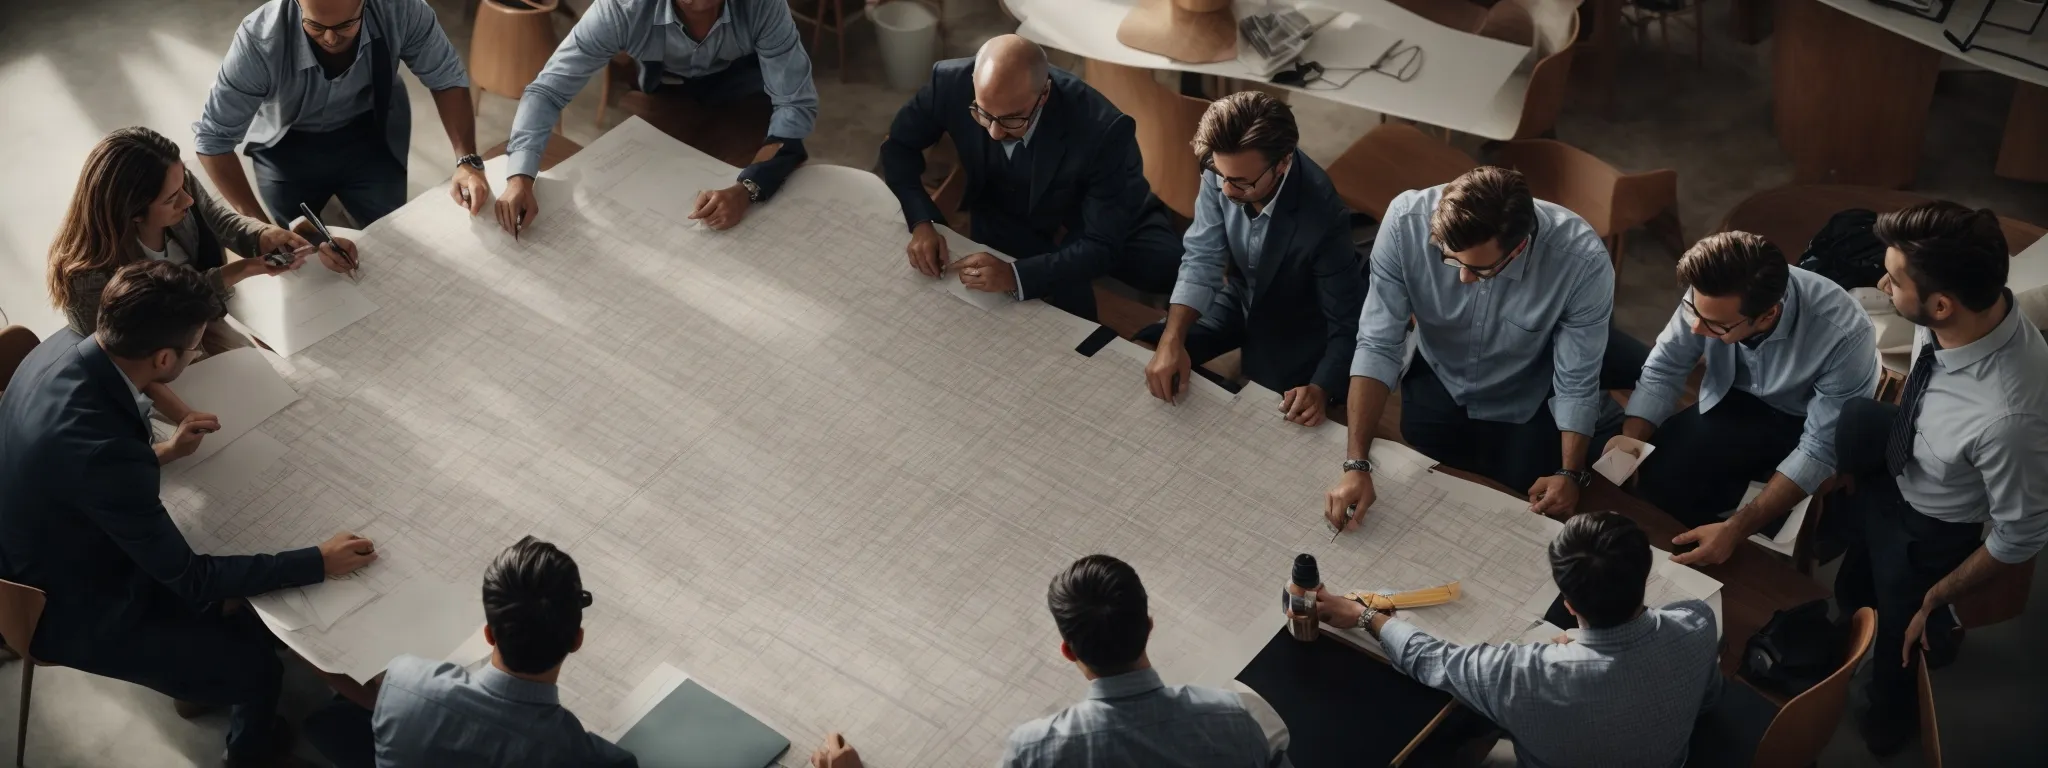 a group of professionals gathered around a large table, collaboratively working on a complex architectural blueprint.